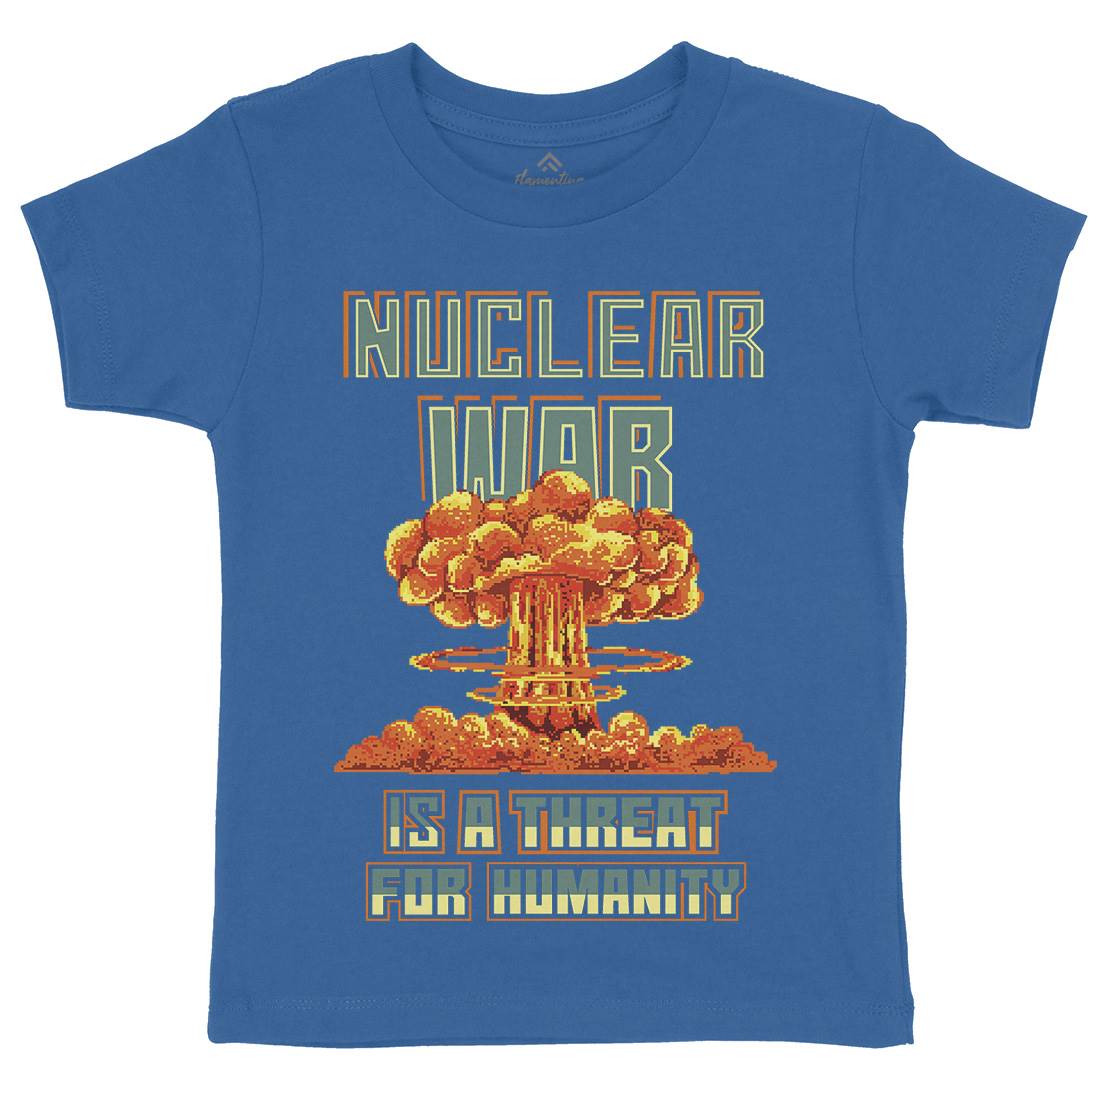 Nuclear War Is A Threat For Humanity Kids Crew Neck T-Shirt Army B941